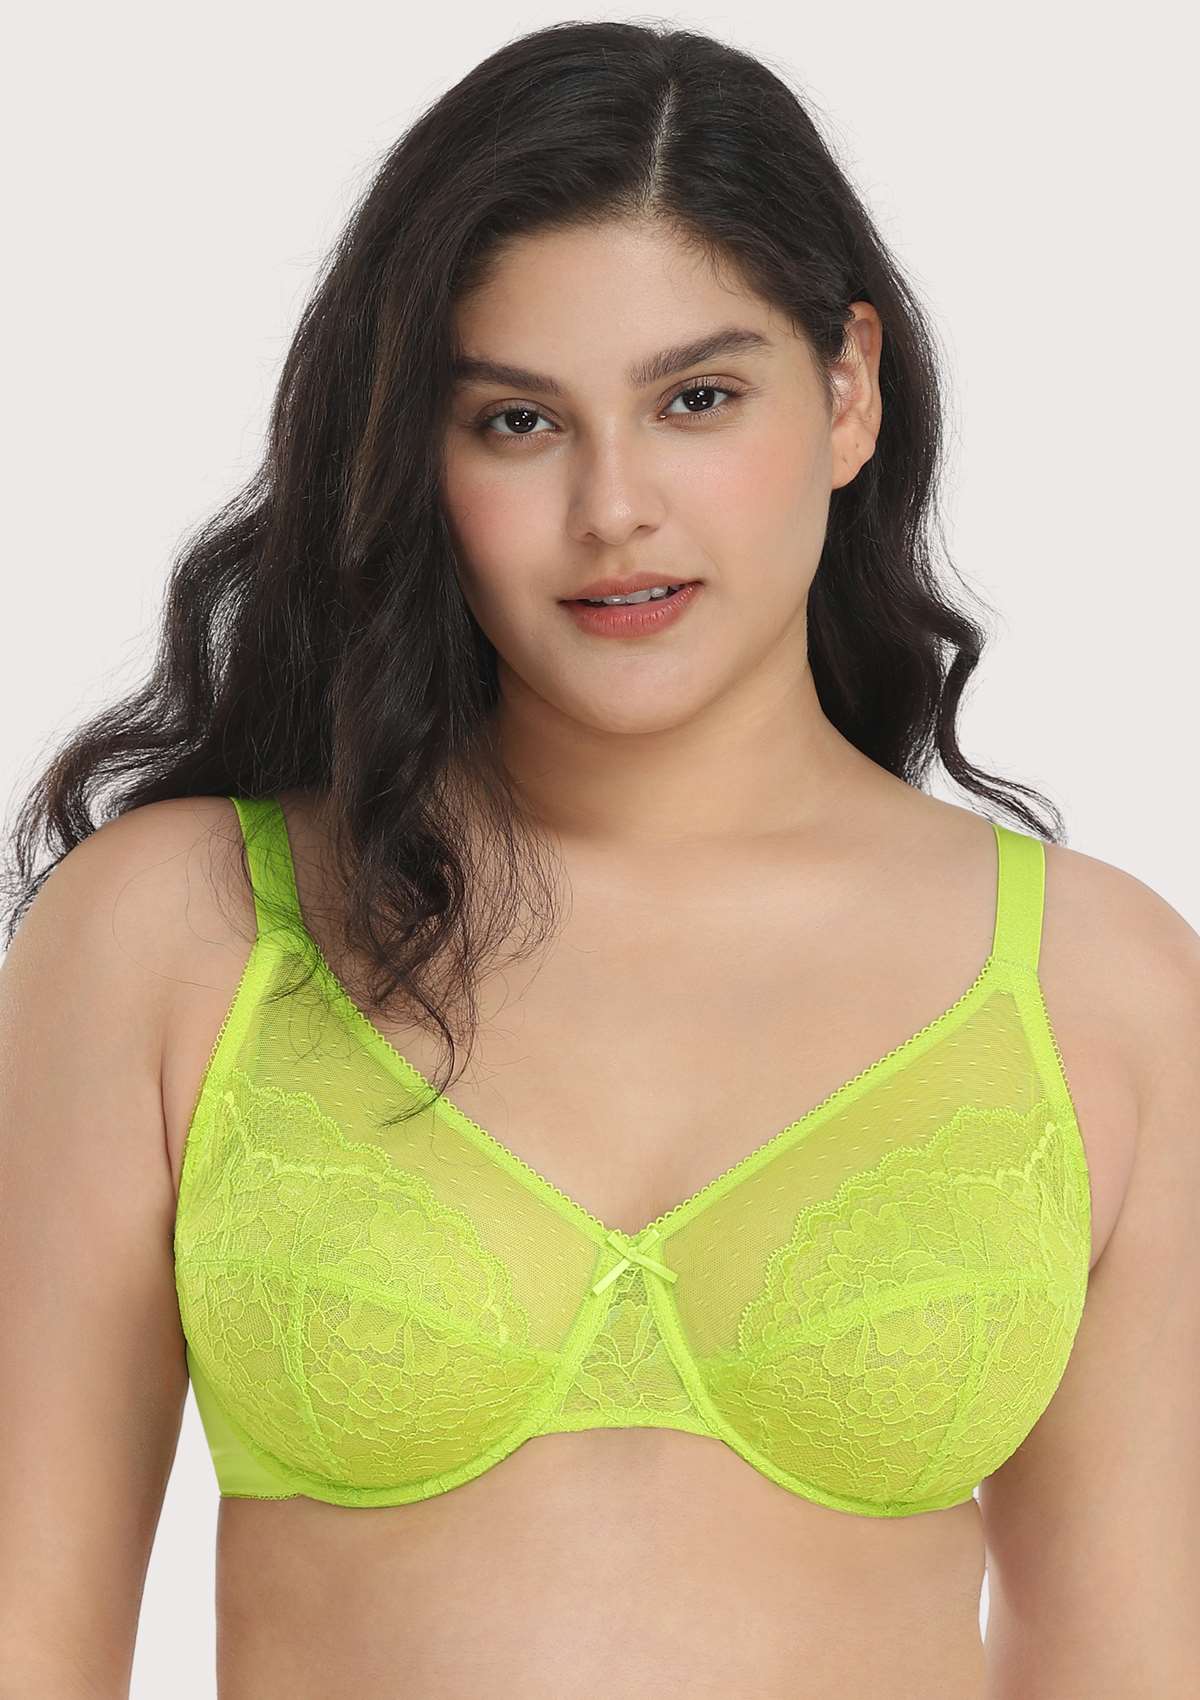 HSIA Enchante Full Cup Minimizing Bra: Supportive Unlined Lace Bra - Lime Green / 38 / DDD/F